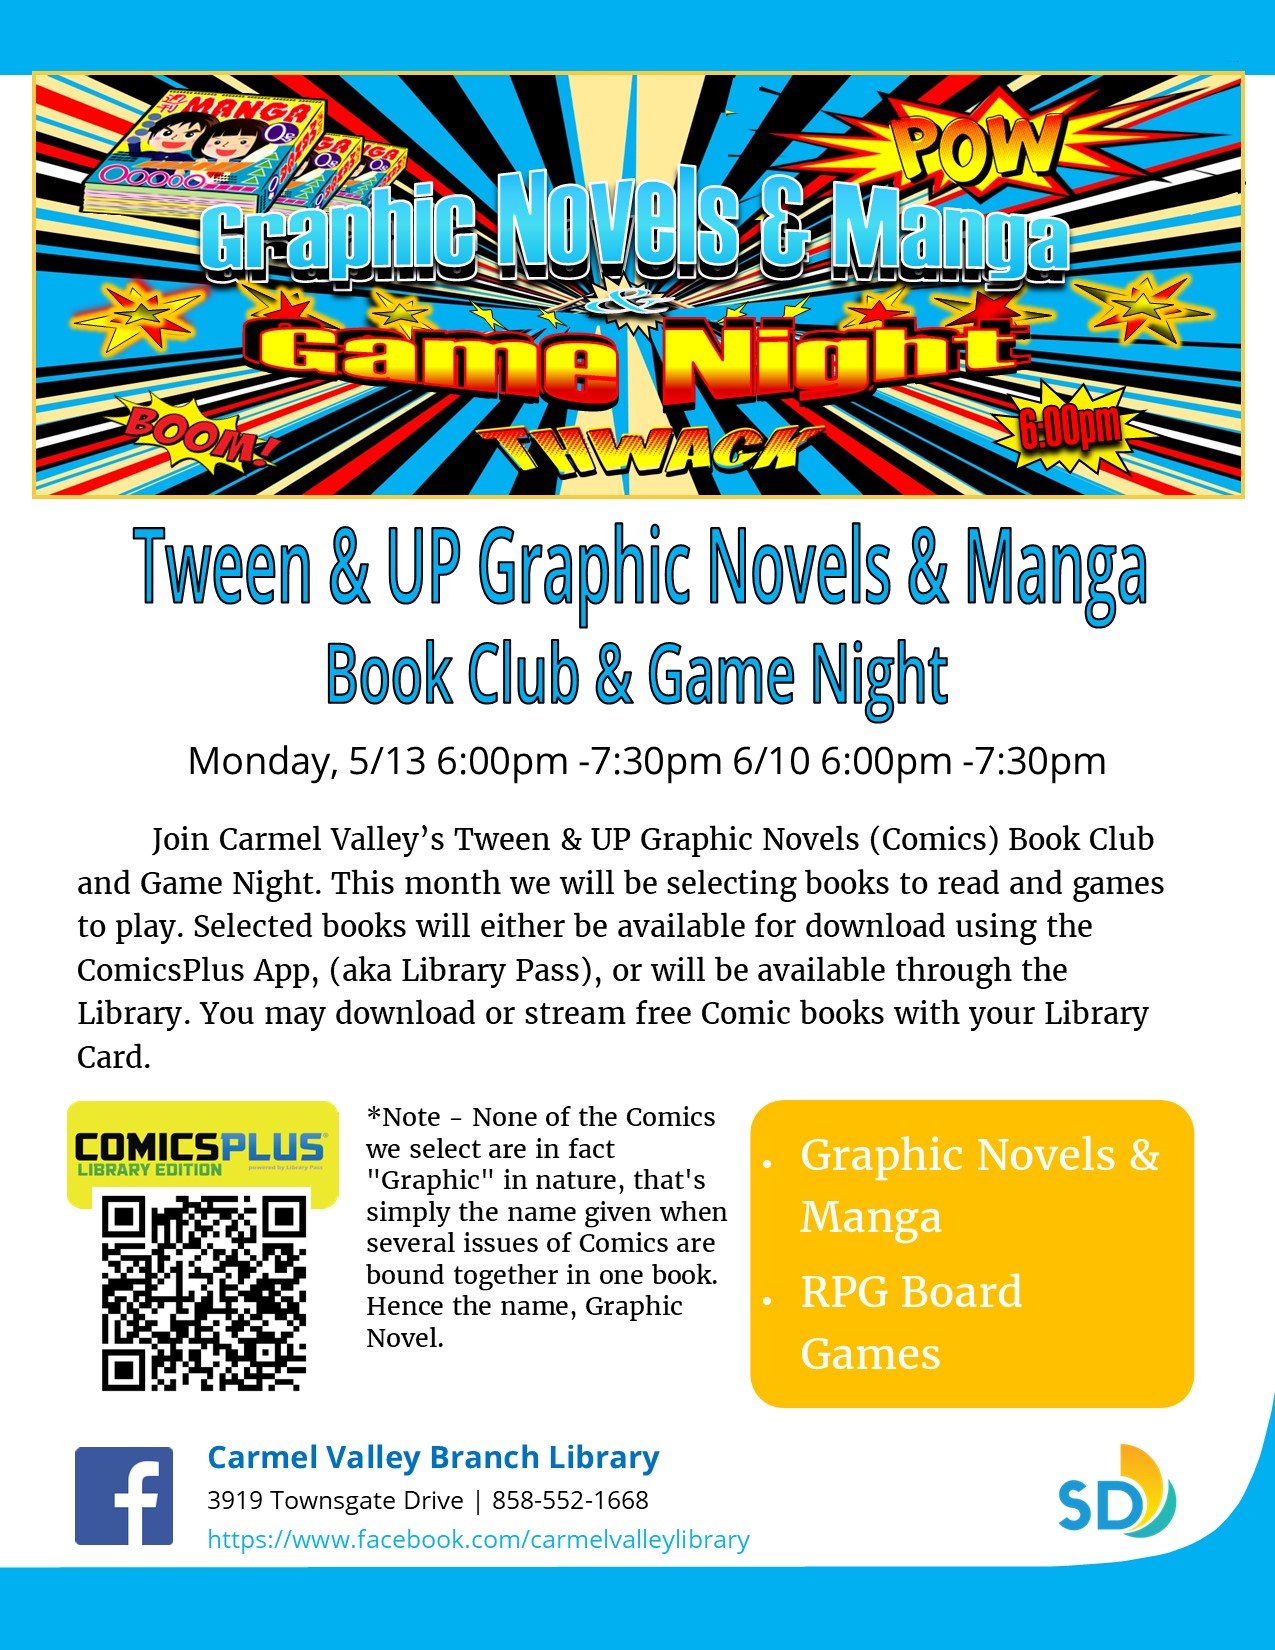 Join Carmel Valley’s Tween & UP Graphic Novels (Comics) Book Club and Game Night. This month we will be selecting books to read and games to play. Selected books will either be available for download using the ComicsPlus App, (aka Library Pass), or will be available through the Library. You may download or stream free Comic books with your Library Card. 